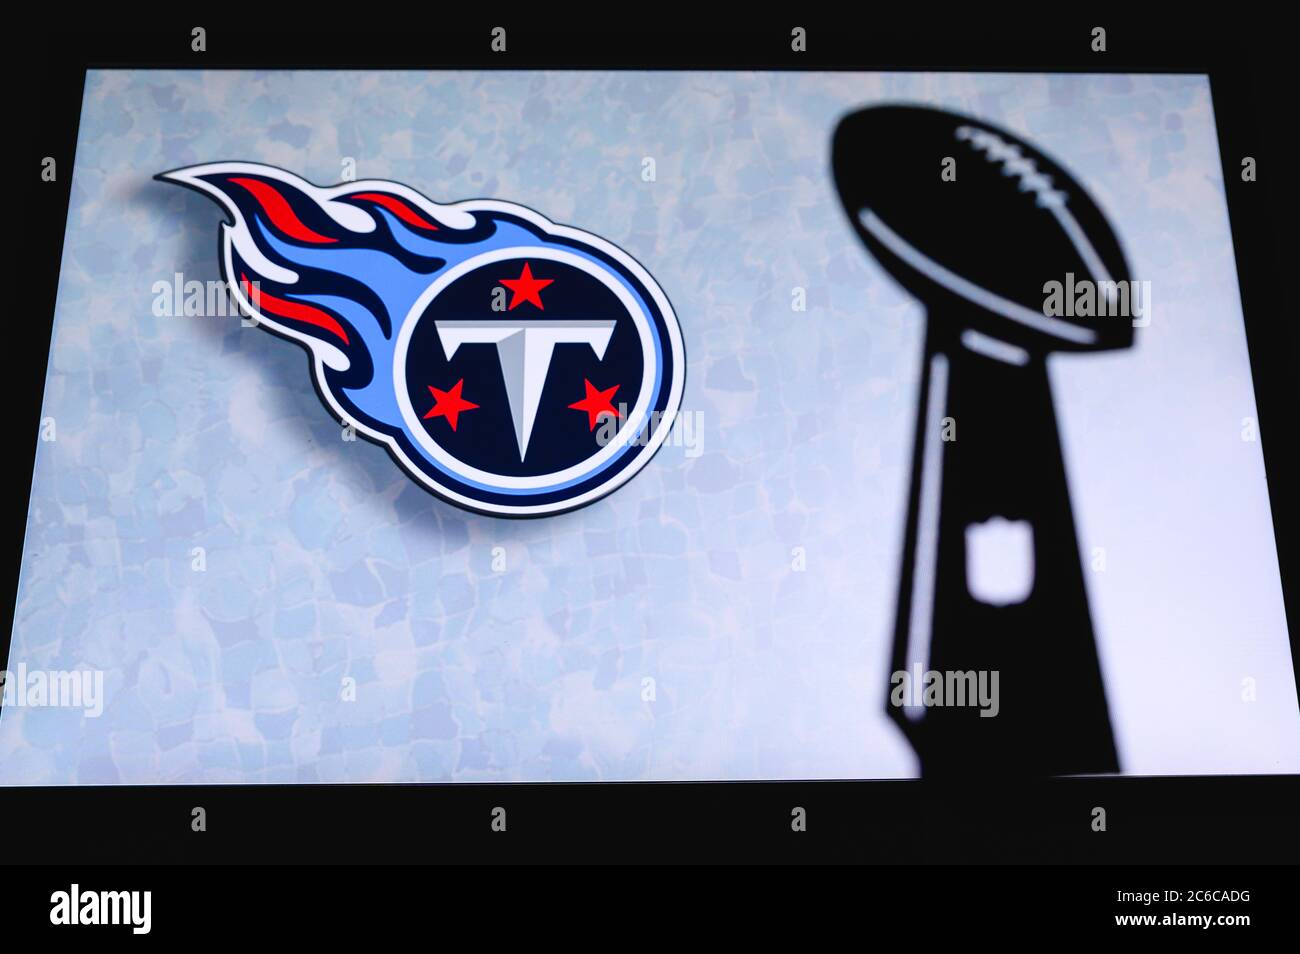 Tennessee Titans professional american football club, silhouette